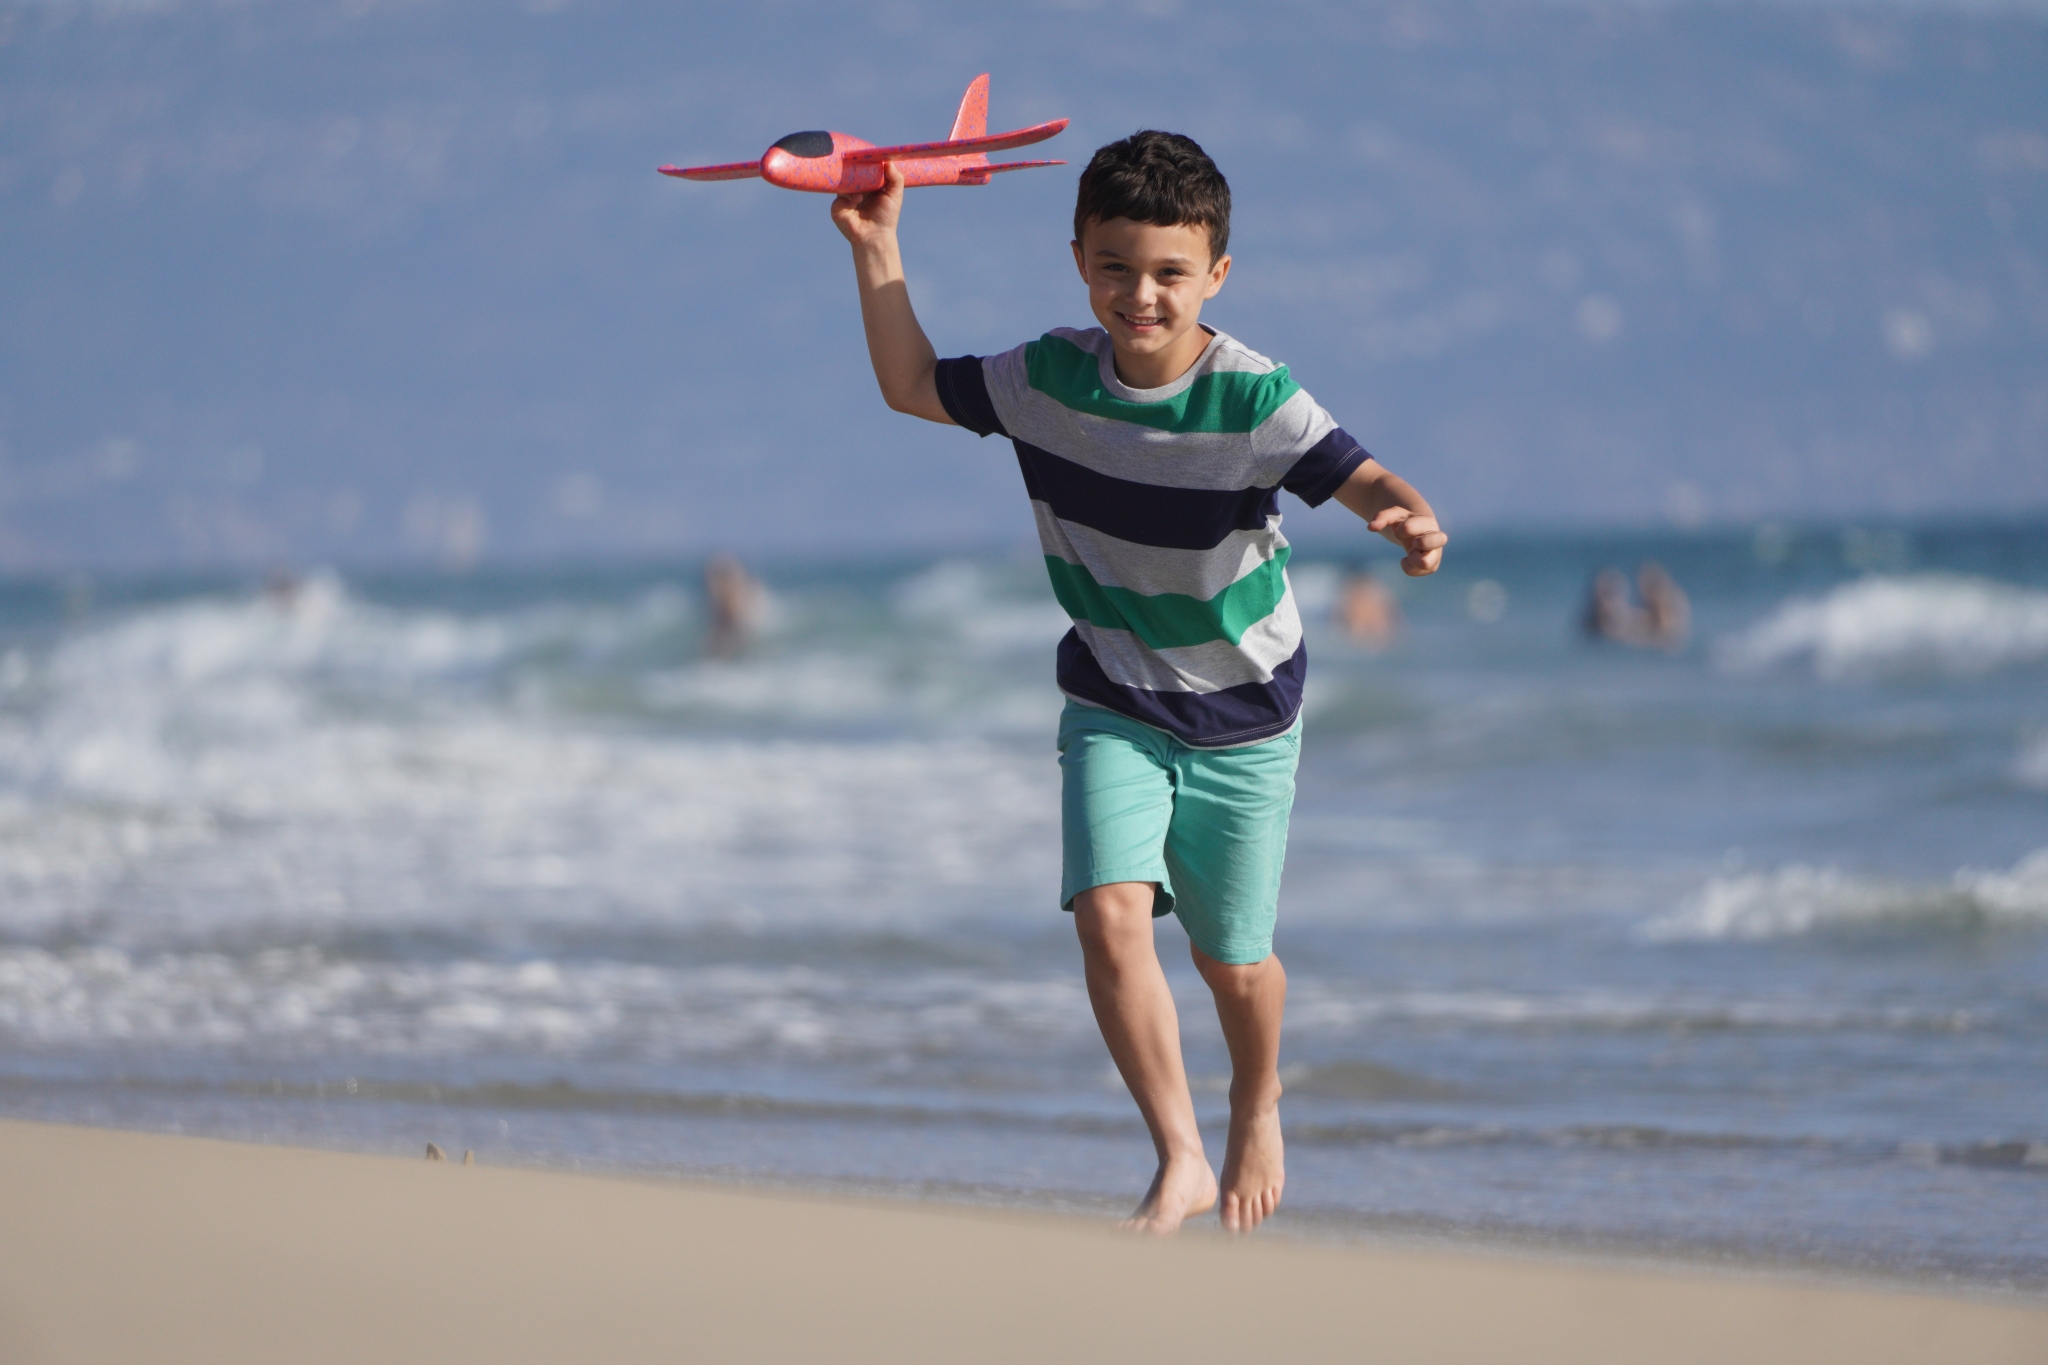 Young boy running on beach and playing with red toy aeroplane with the sea in a bokeh background